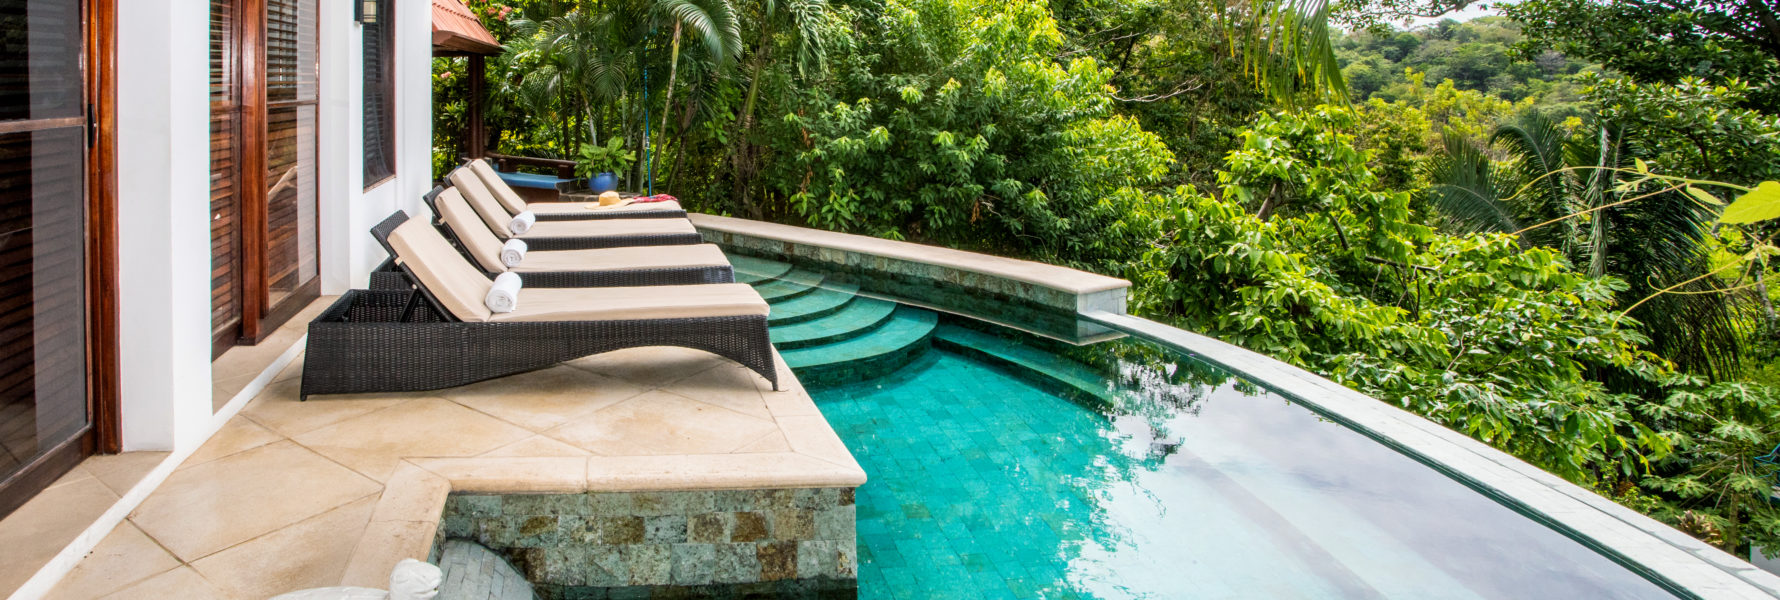 The recently renovated infinity pool is lined with stunning natural stone and has a deck with luxury recliners.